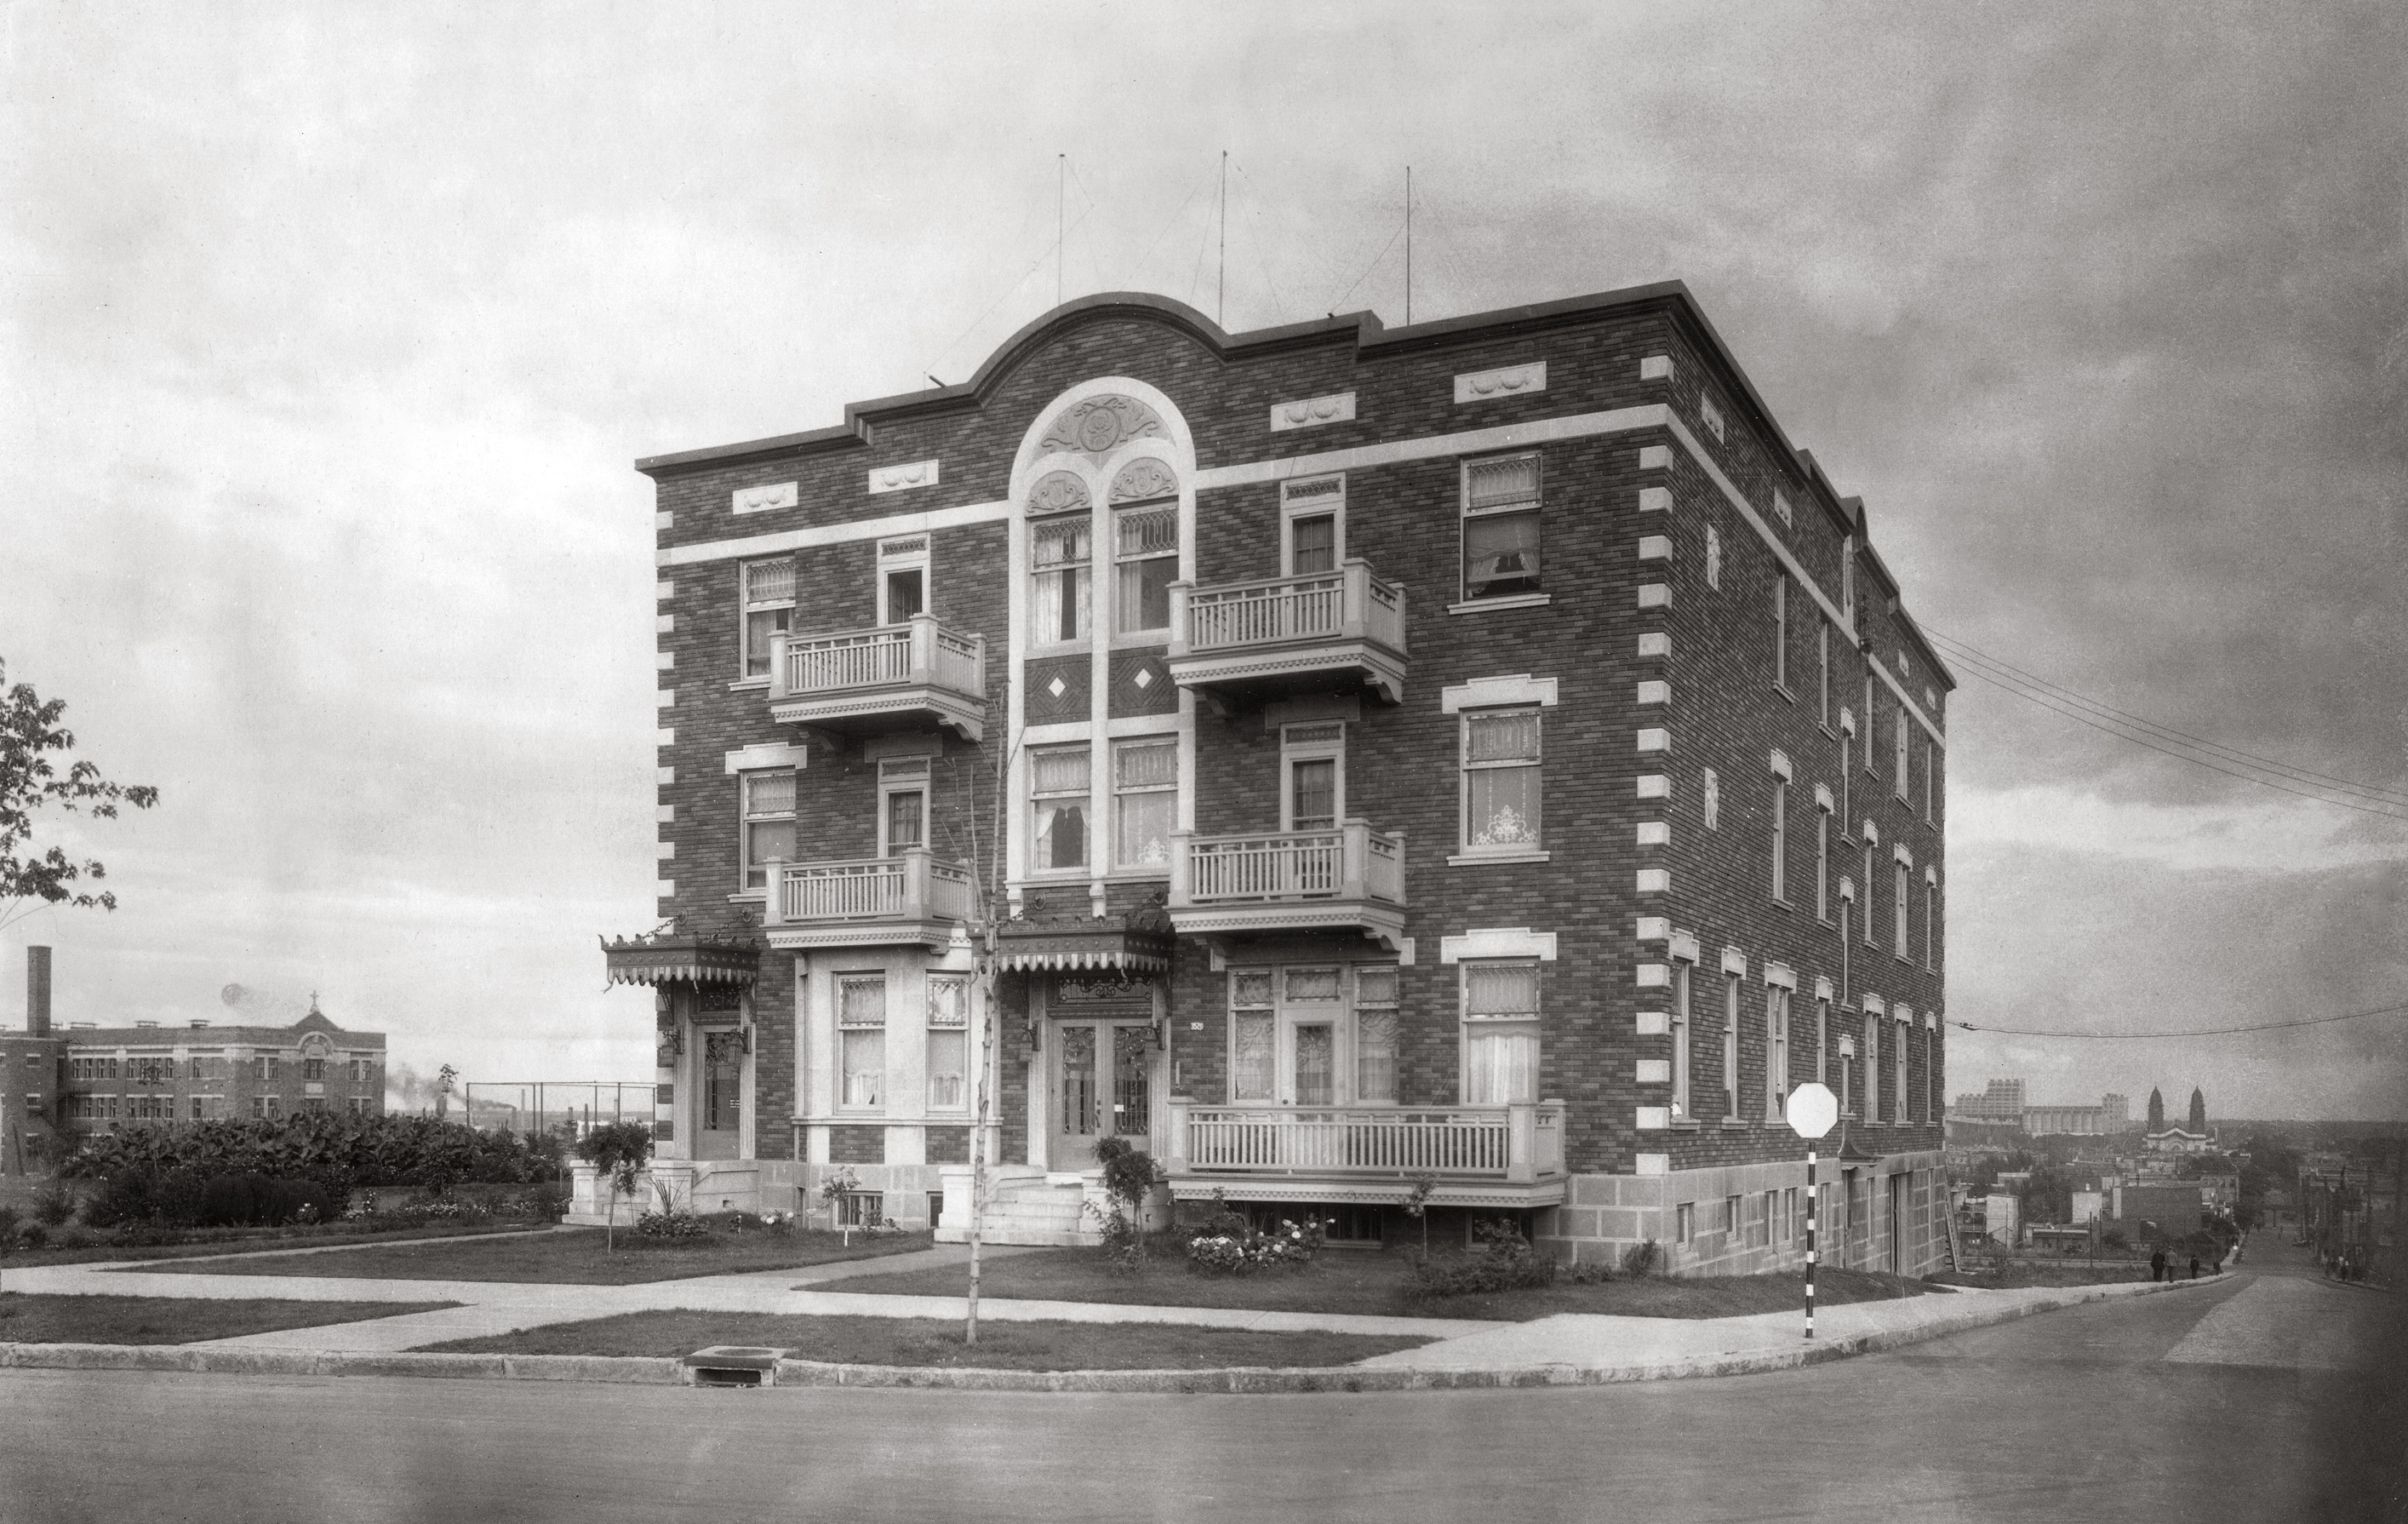 My great-grandfather Napoleon Senecal's building at 3520 Sherbrooke Street East, Montreal, Quebec, Canada in 1931. View full size.